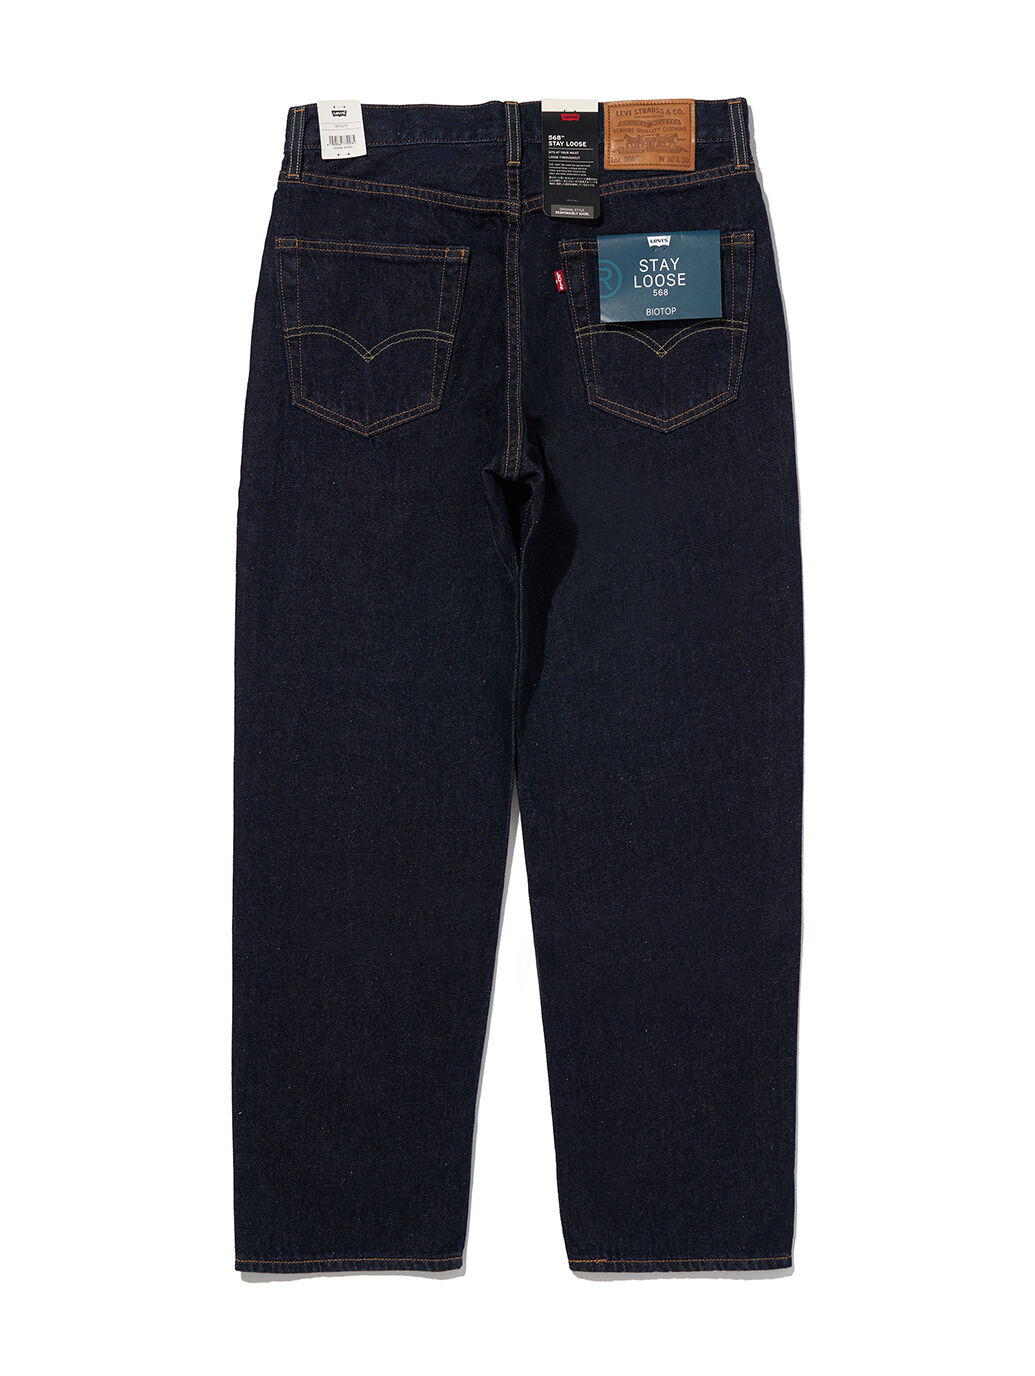 LEVI'S® FOR BIOTOP 568™ STAY LOOSE ダークインディゴ FOR MEN RINSE 